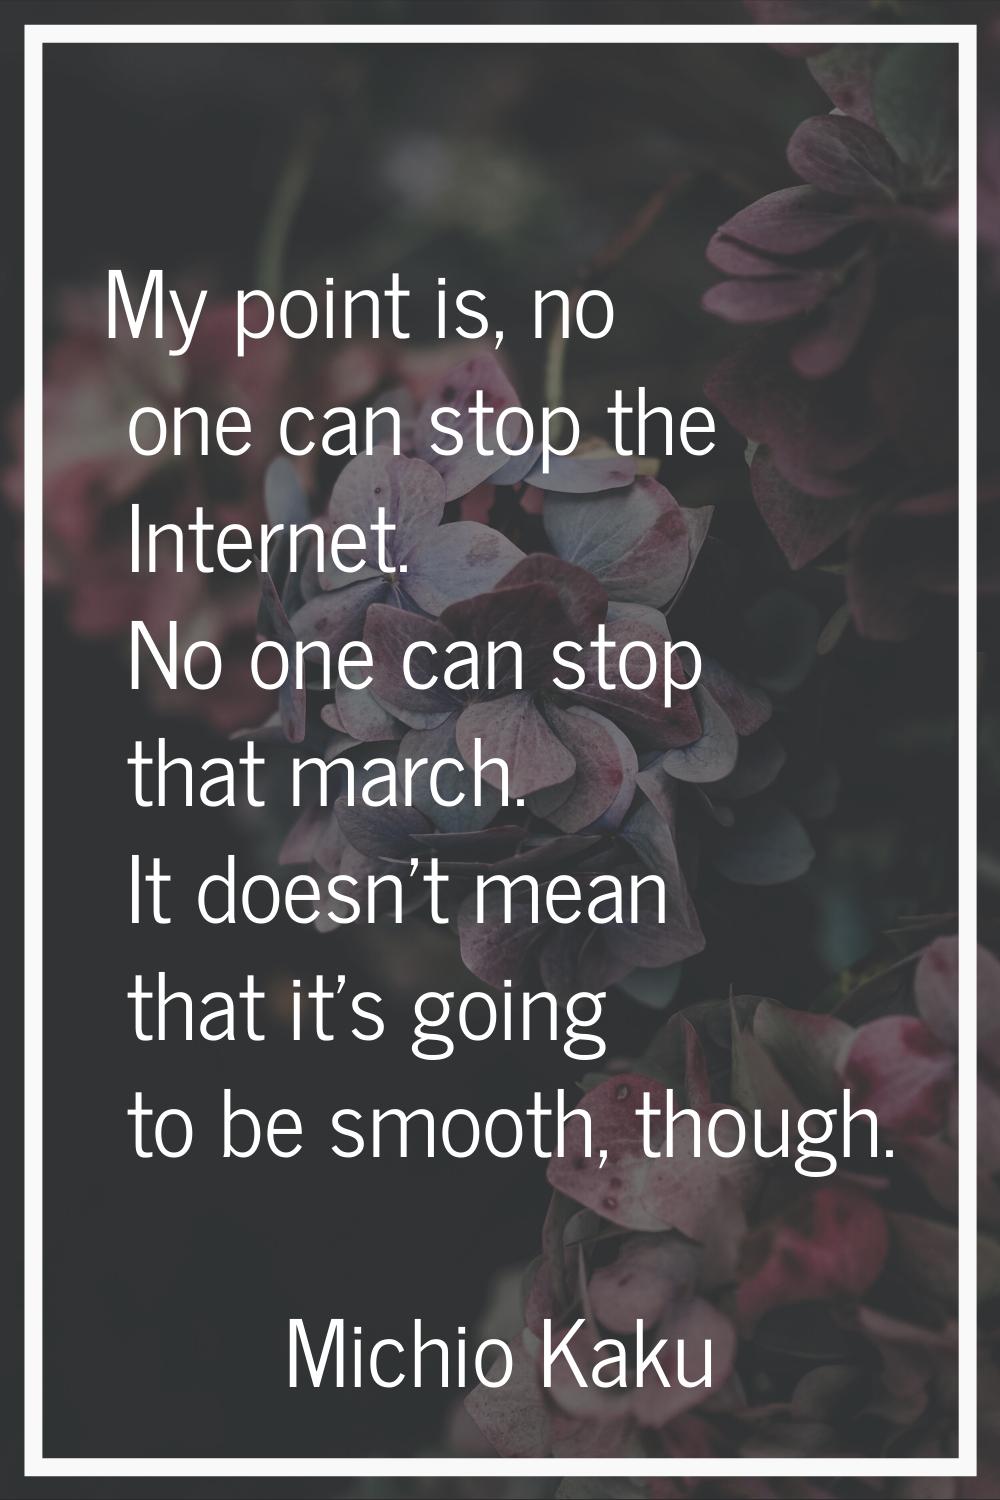 My point is, no one can stop the Internet. No one can stop that march. It doesn't mean that it's go